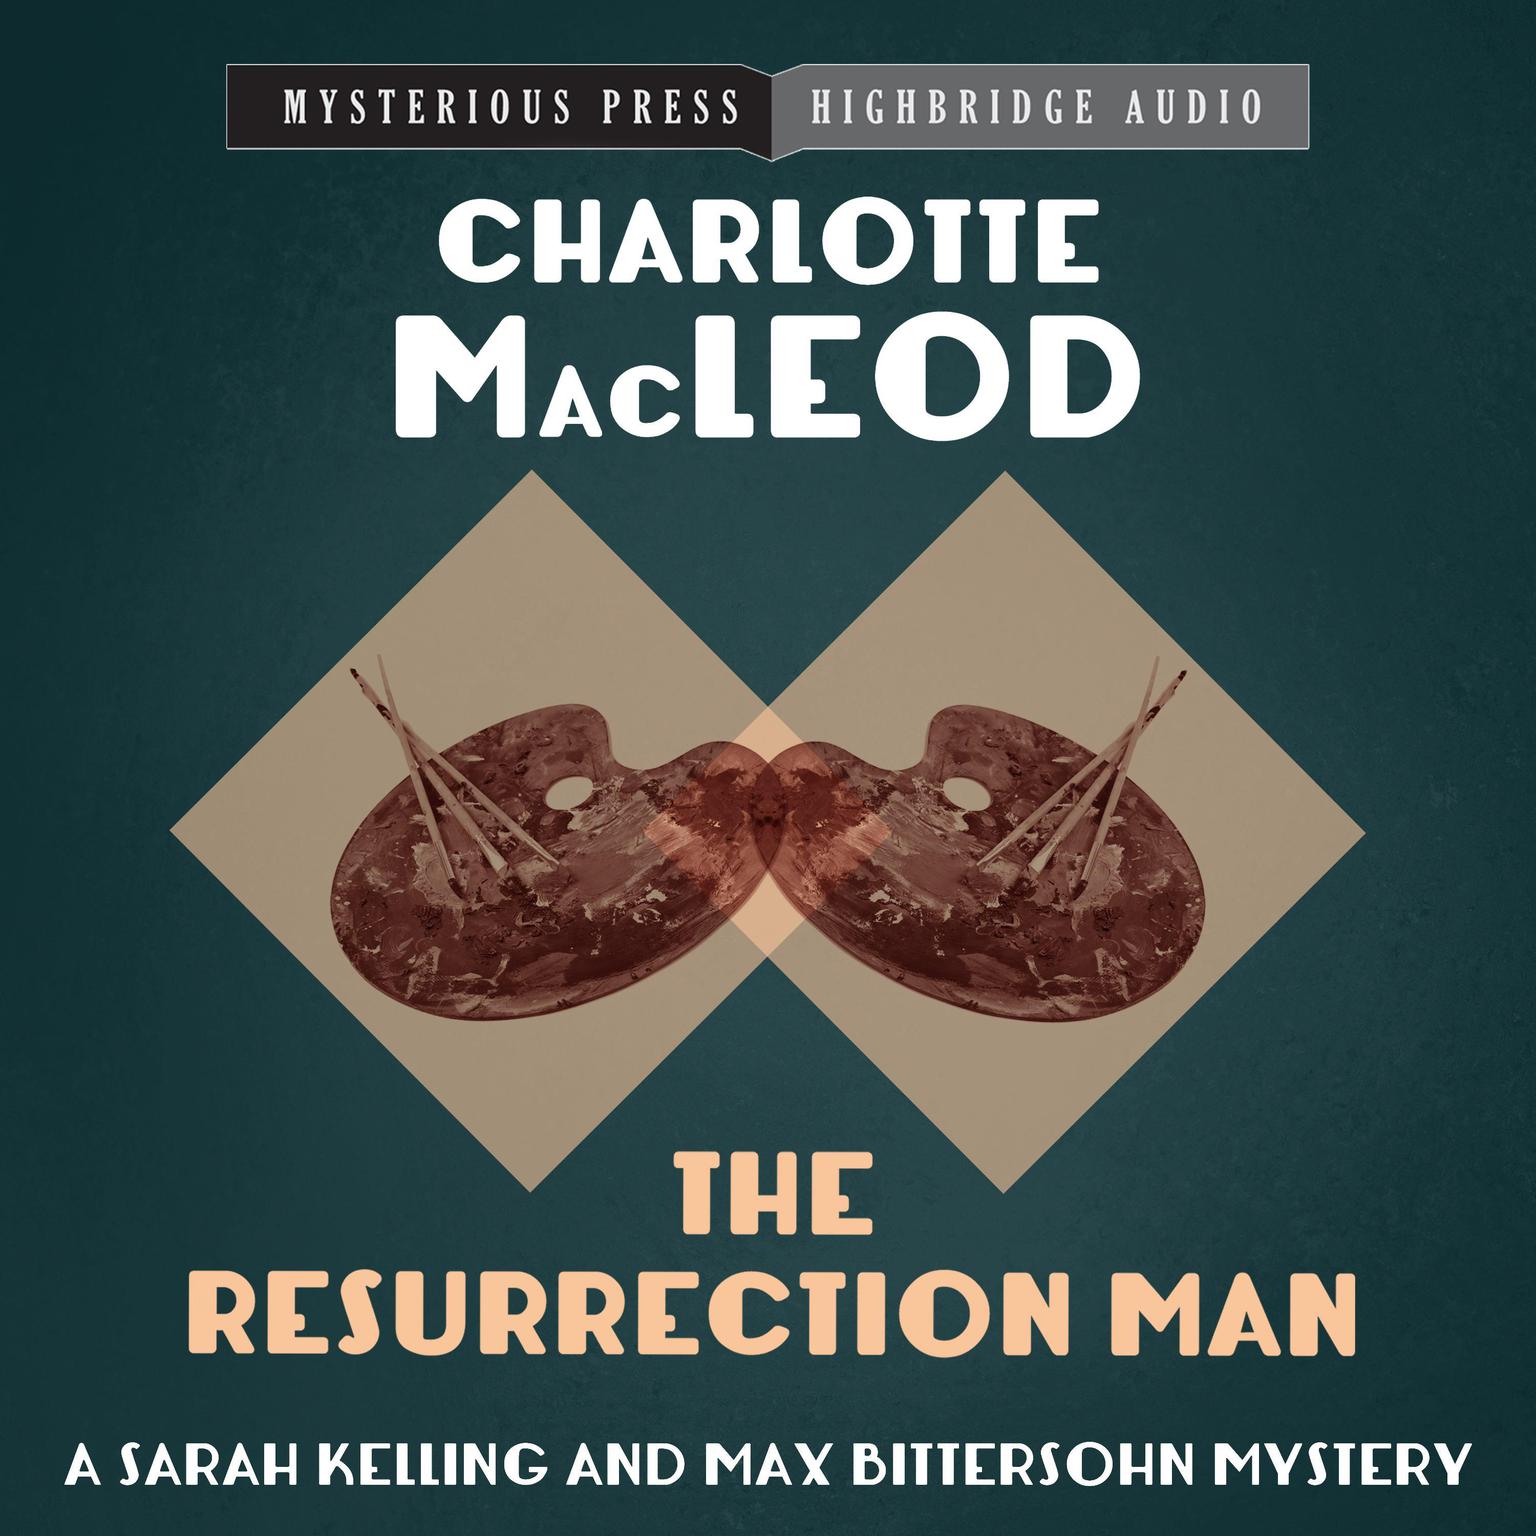 The Resurrection Man Audiobook, by Charlotte MacLeod